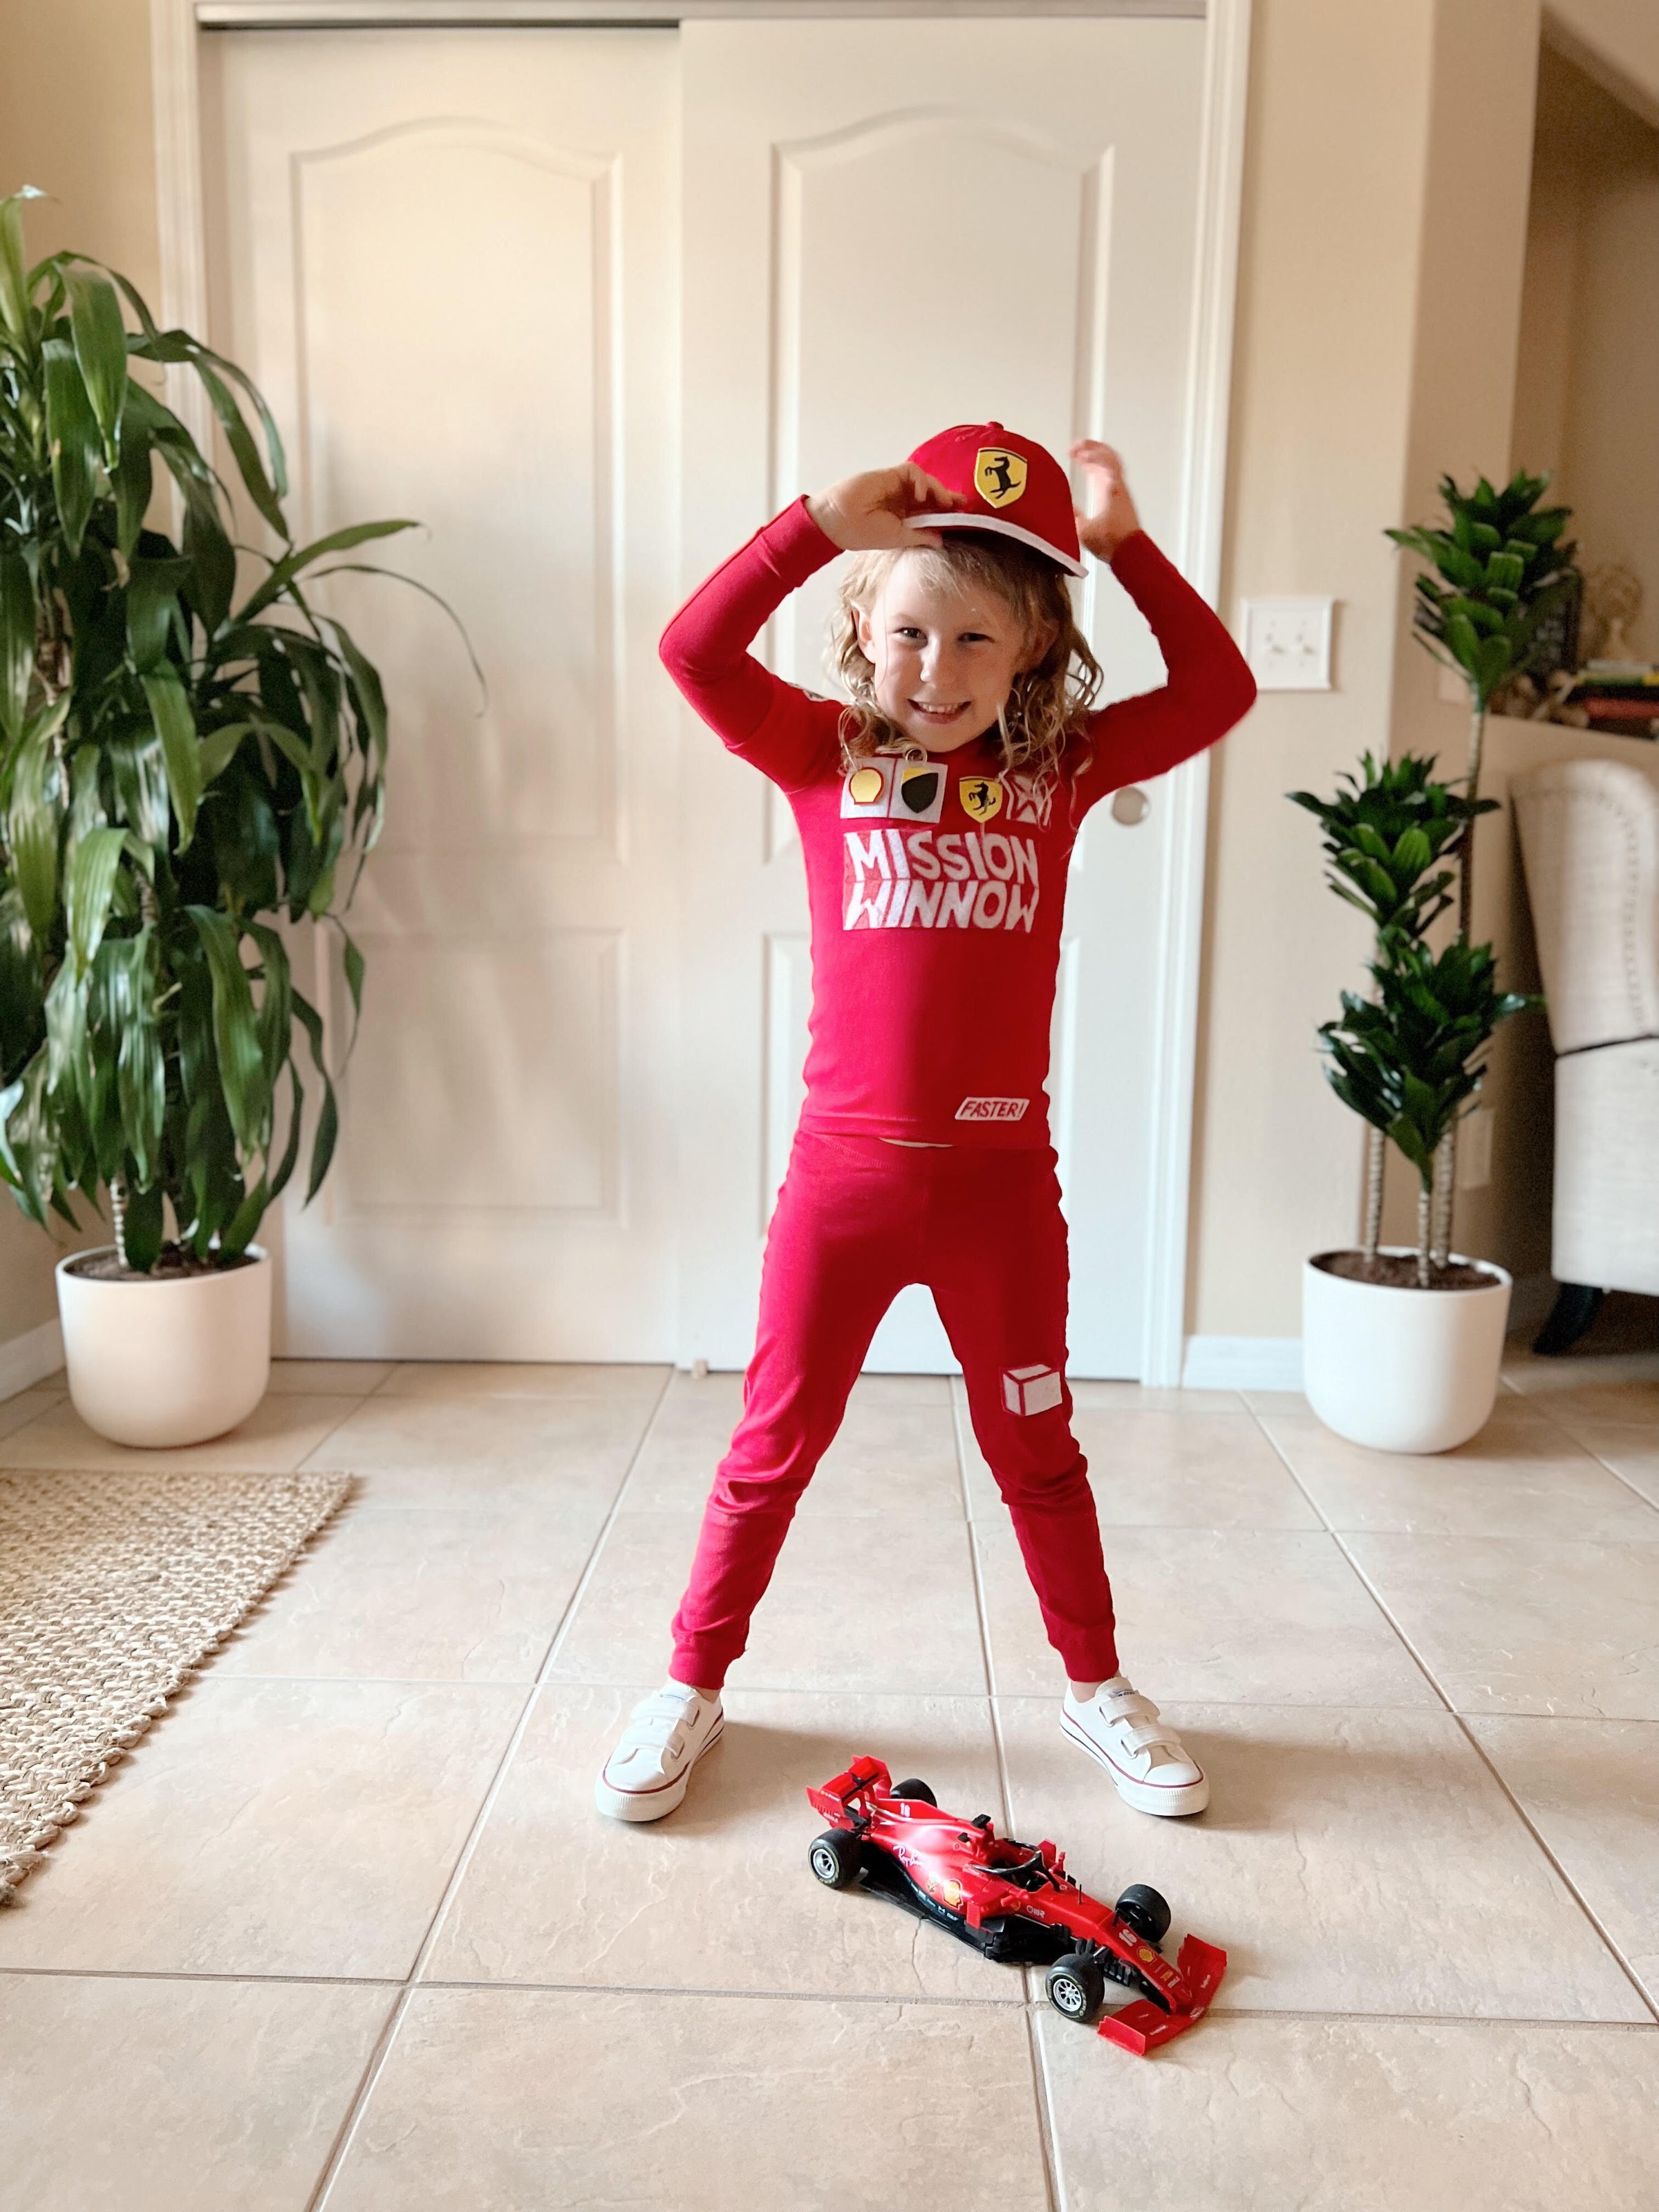 Race Car Driver: A child wearing a red outfit to resemble a race car driver.